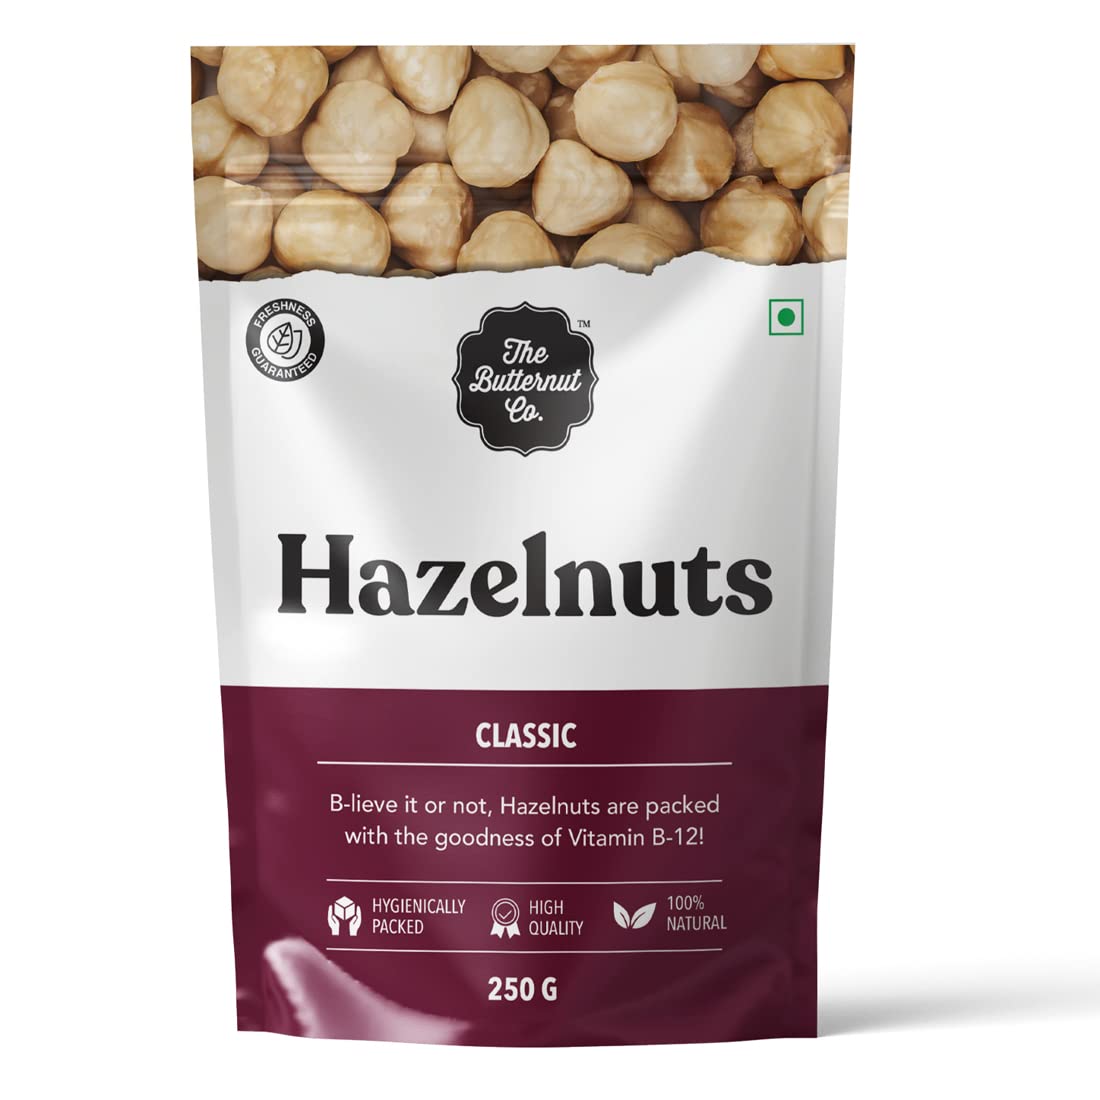 The Butternut Co. Hazelnut Kernels Without Shell 250g | 100% Natural | High Protein & High Fiber | Gluten Free | Superfood | Whole Hazel Nuts